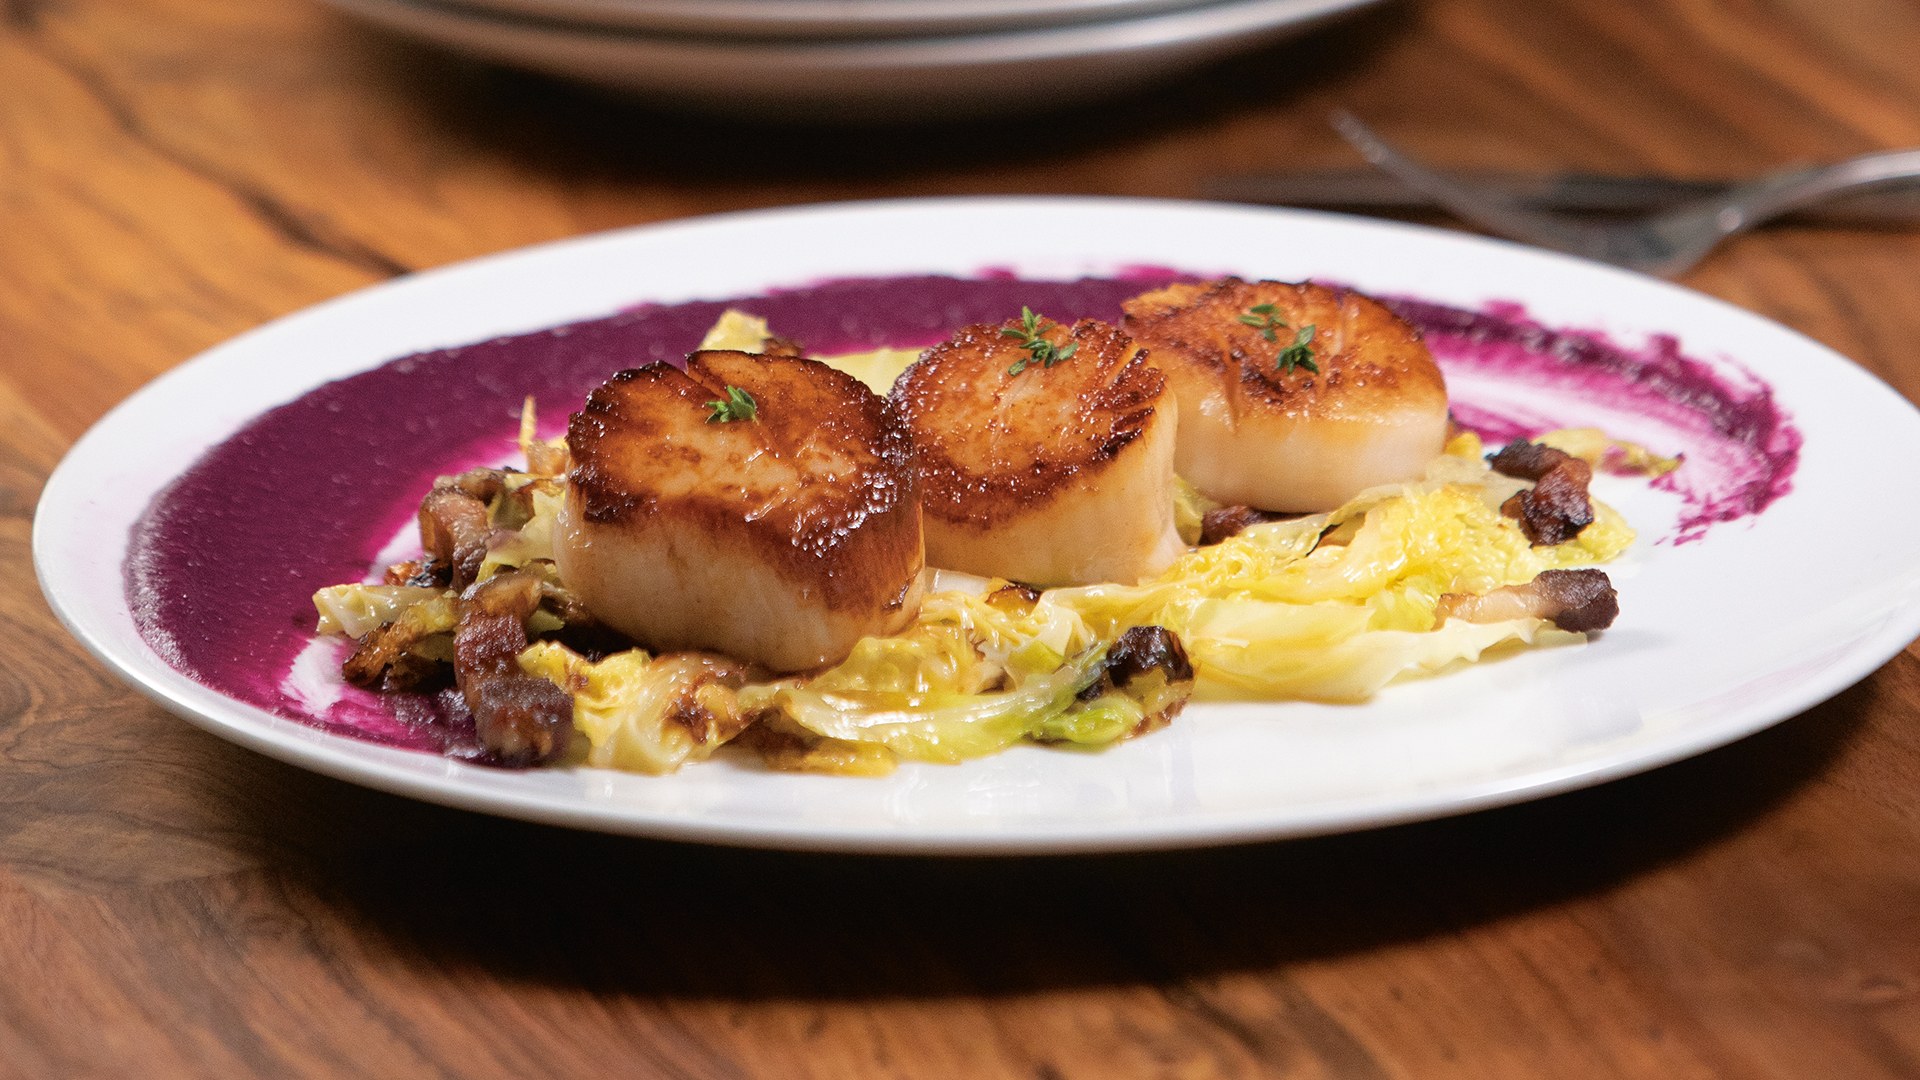 Seared scallops with bacon and cabbage